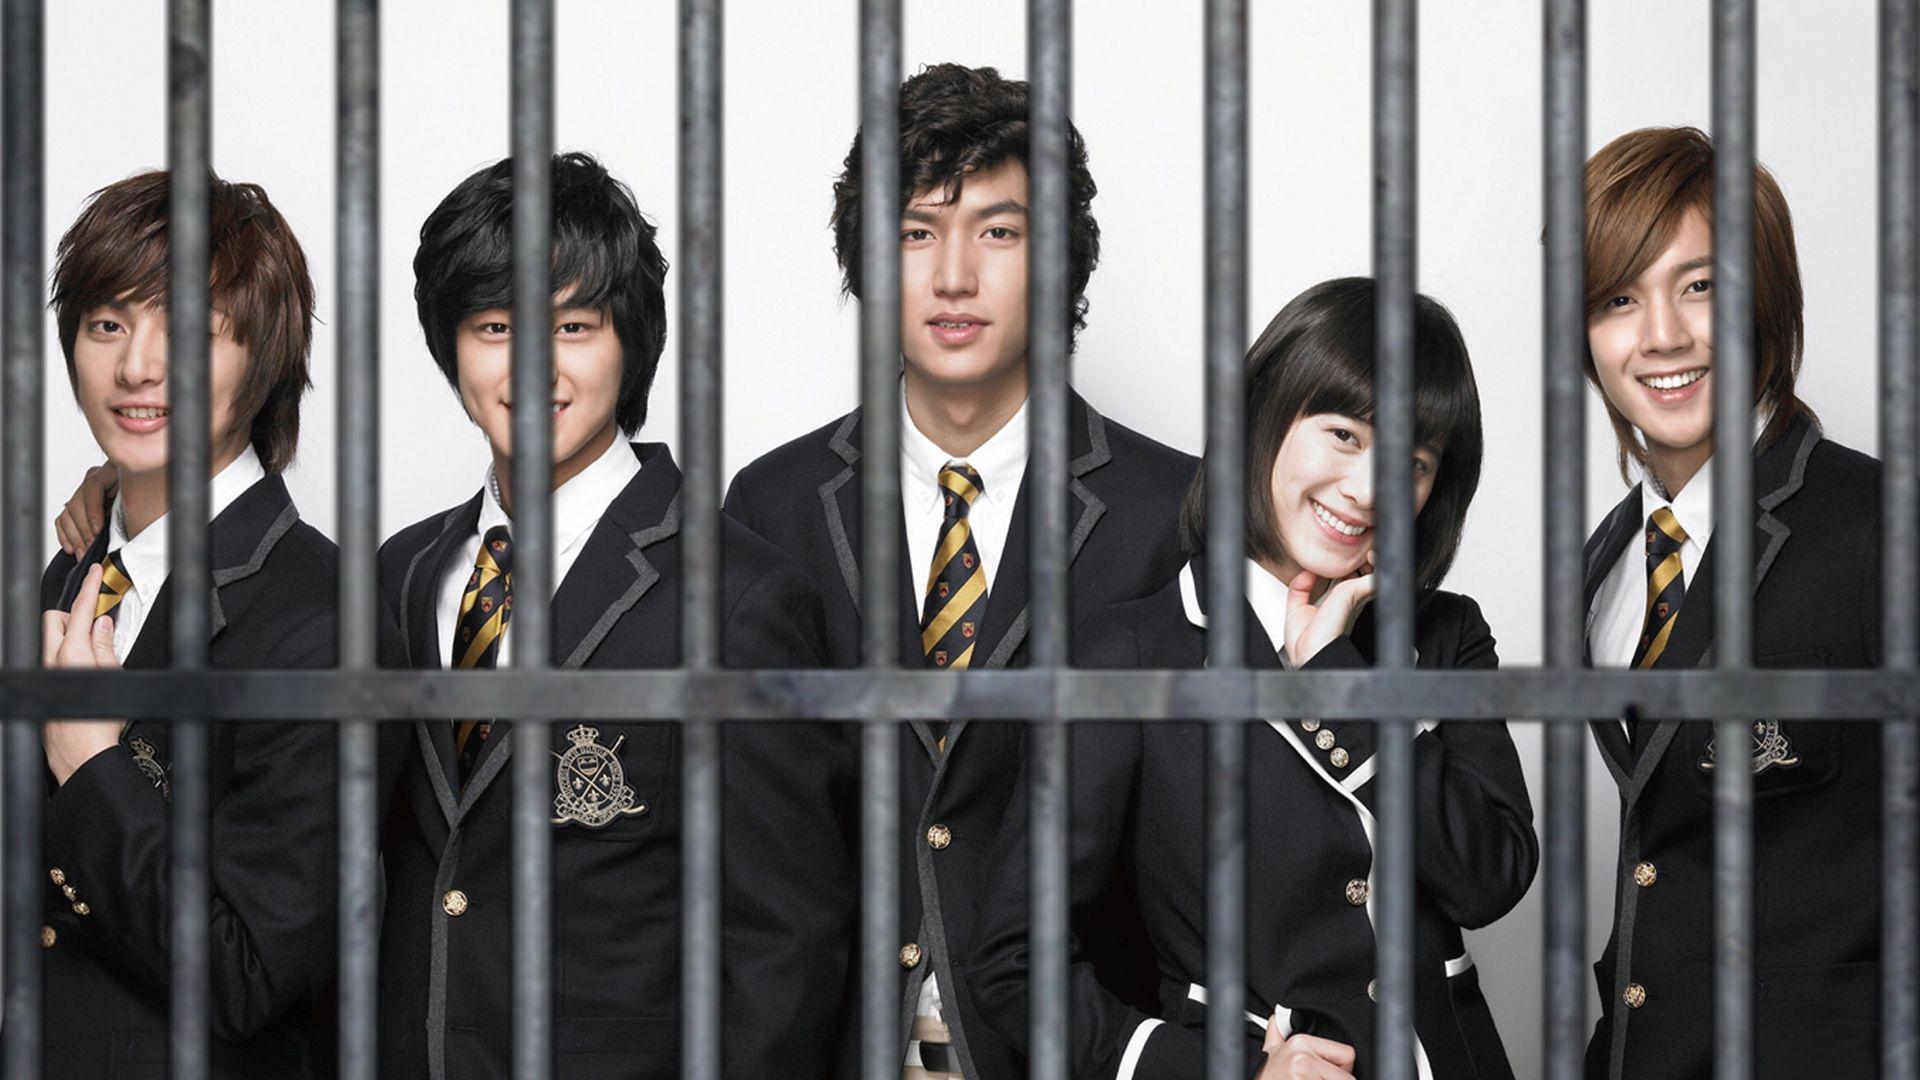 American adaptation of Boys Over Flowers announces lawsuits